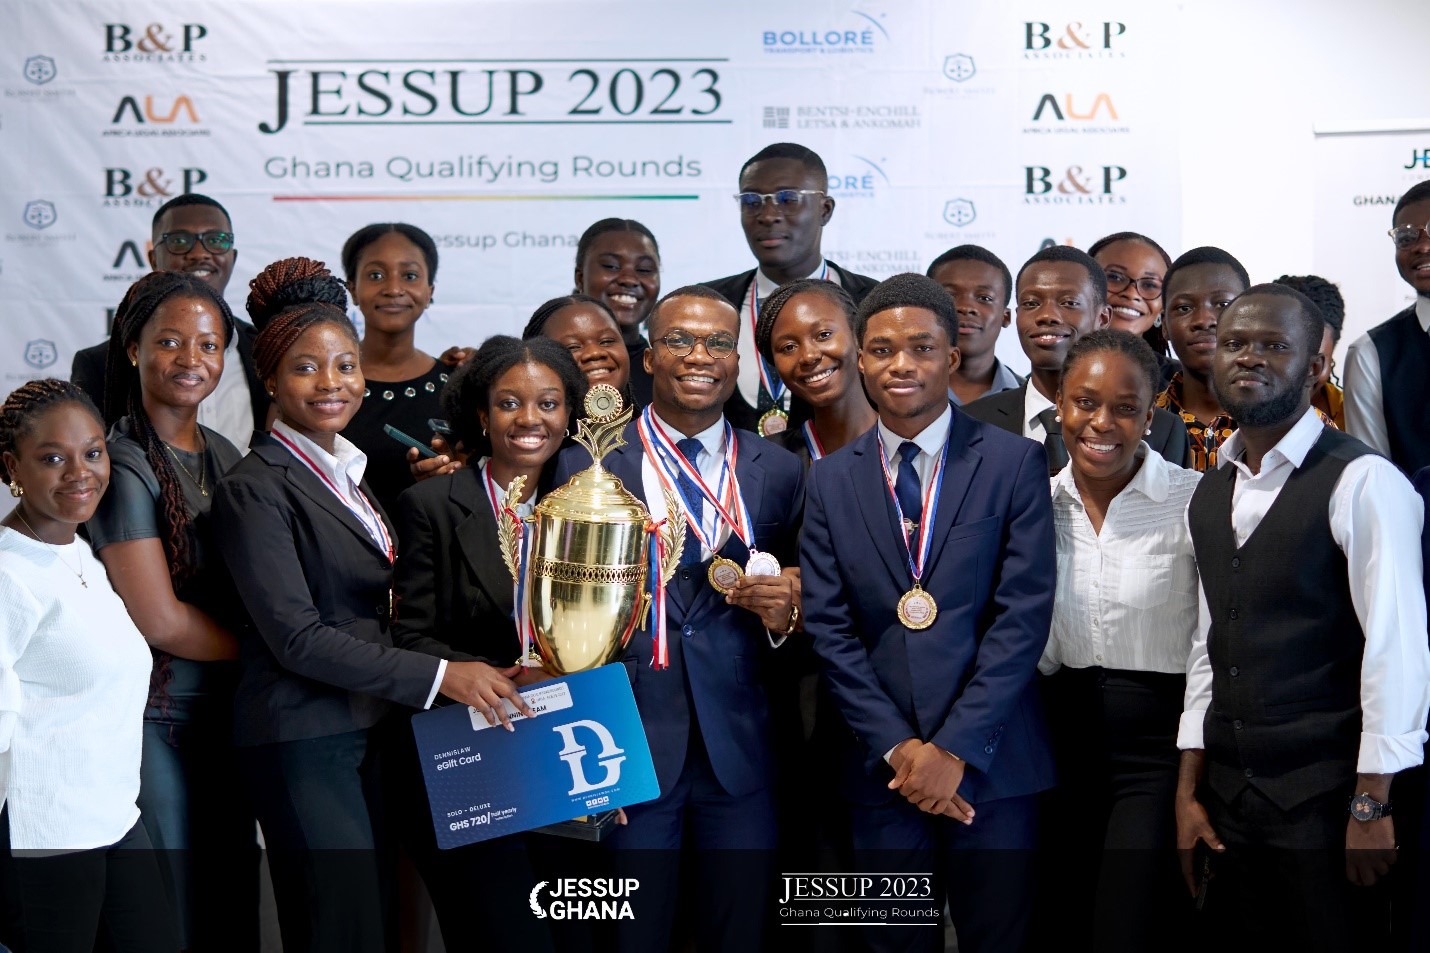 JESSUP 2024 Ghana Qualifying Rounds scheduled for Feb. 12